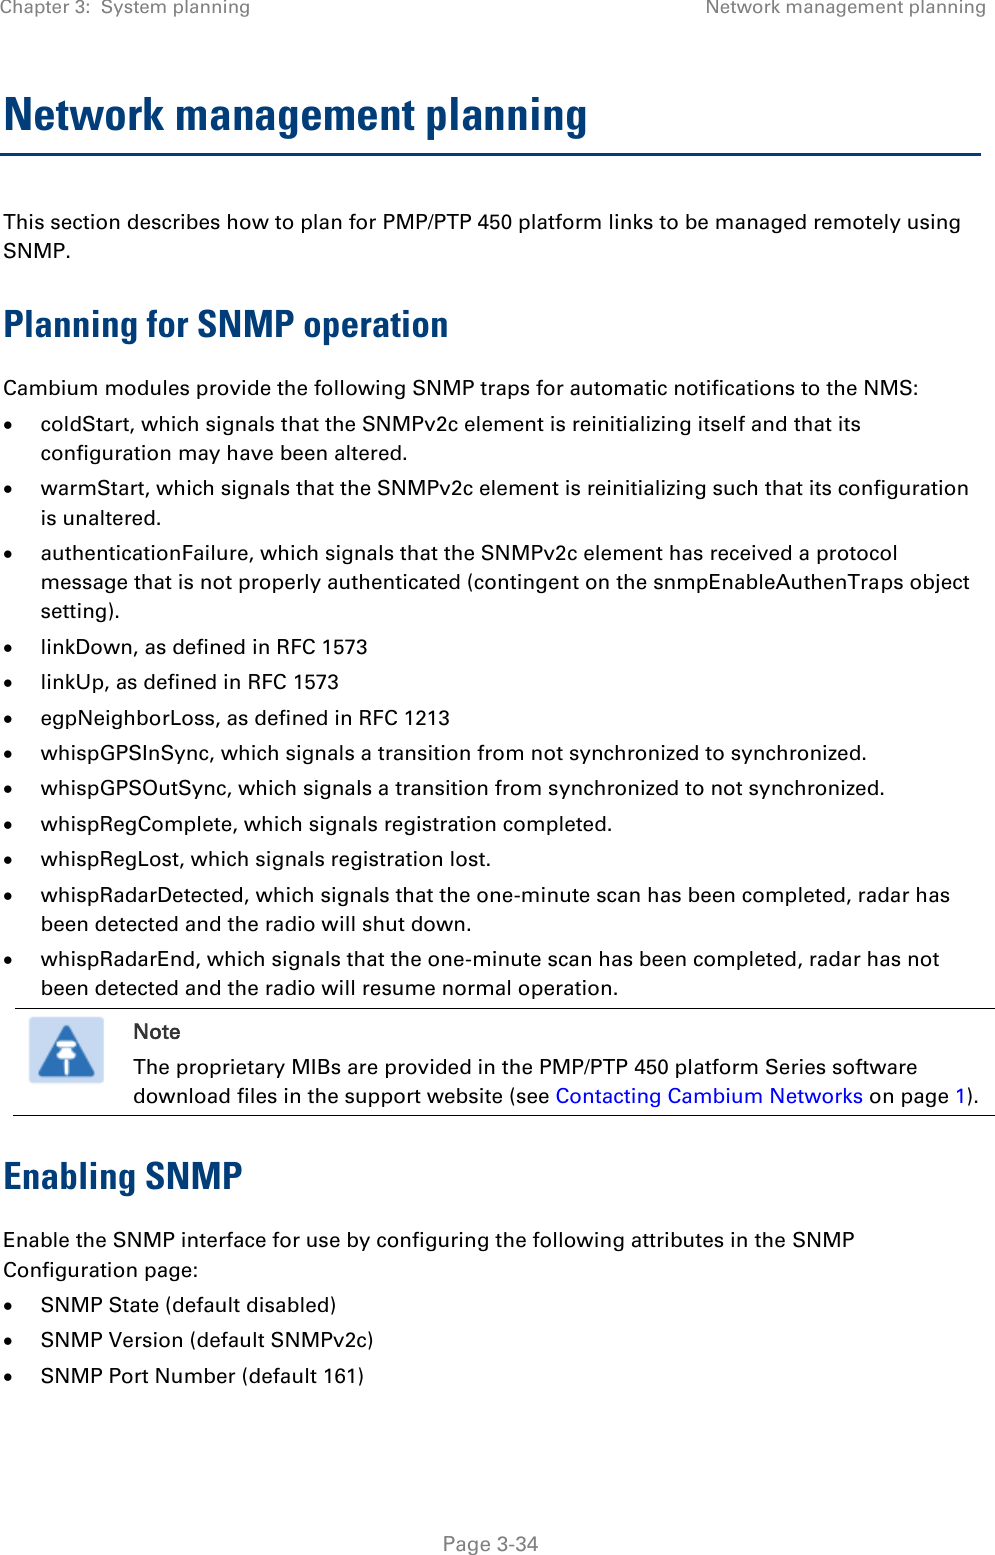 Chapter 3:  System planning Network management planning   Page 3-34 Network management planning This section describes how to plan for PMP/PTP 450 platform links to be managed remotely using SNMP. Planning for SNMP operation Cambium modules provide the following SNMP traps for automatic notifications to the NMS:  coldStart, which signals that the SNMPv2c element is reinitializing itself and that its configuration may have been altered.  warmStart, which signals that the SNMPv2c element is reinitializing such that its configuration is unaltered.  authenticationFailure, which signals that the SNMPv2c element has received a protocol message that is not properly authenticated (contingent on the snmpEnableAuthenTraps object setting).  linkDown, as defined in RFC 1573  linkUp, as defined in RFC 1573  egpNeighborLoss, as defined in RFC 1213  whispGPSInSync, which signals a transition from not synchronized to synchronized.  whispGPSOutSync, which signals a transition from synchronized to not synchronized.  whispRegComplete, which signals registration completed.   whispRegLost, which signals registration lost.   whispRadarDetected, which signals that the one-minute scan has been completed, radar has been detected and the radio will shut down.   whispRadarEnd, which signals that the one-minute scan has been completed, radar has not been detected and the radio will resume normal operation.   Note The proprietary MIBs are provided in the PMP/PTP 450 platform Series software download files in the support website (see Contacting Cambium Networks on page 1). Enabling SNMP Enable the SNMP interface for use by configuring the following attributes in the SNMP Configuration page:  SNMP State (default disabled)  SNMP Version (default SNMPv2c)  SNMP Port Number (default 161) 